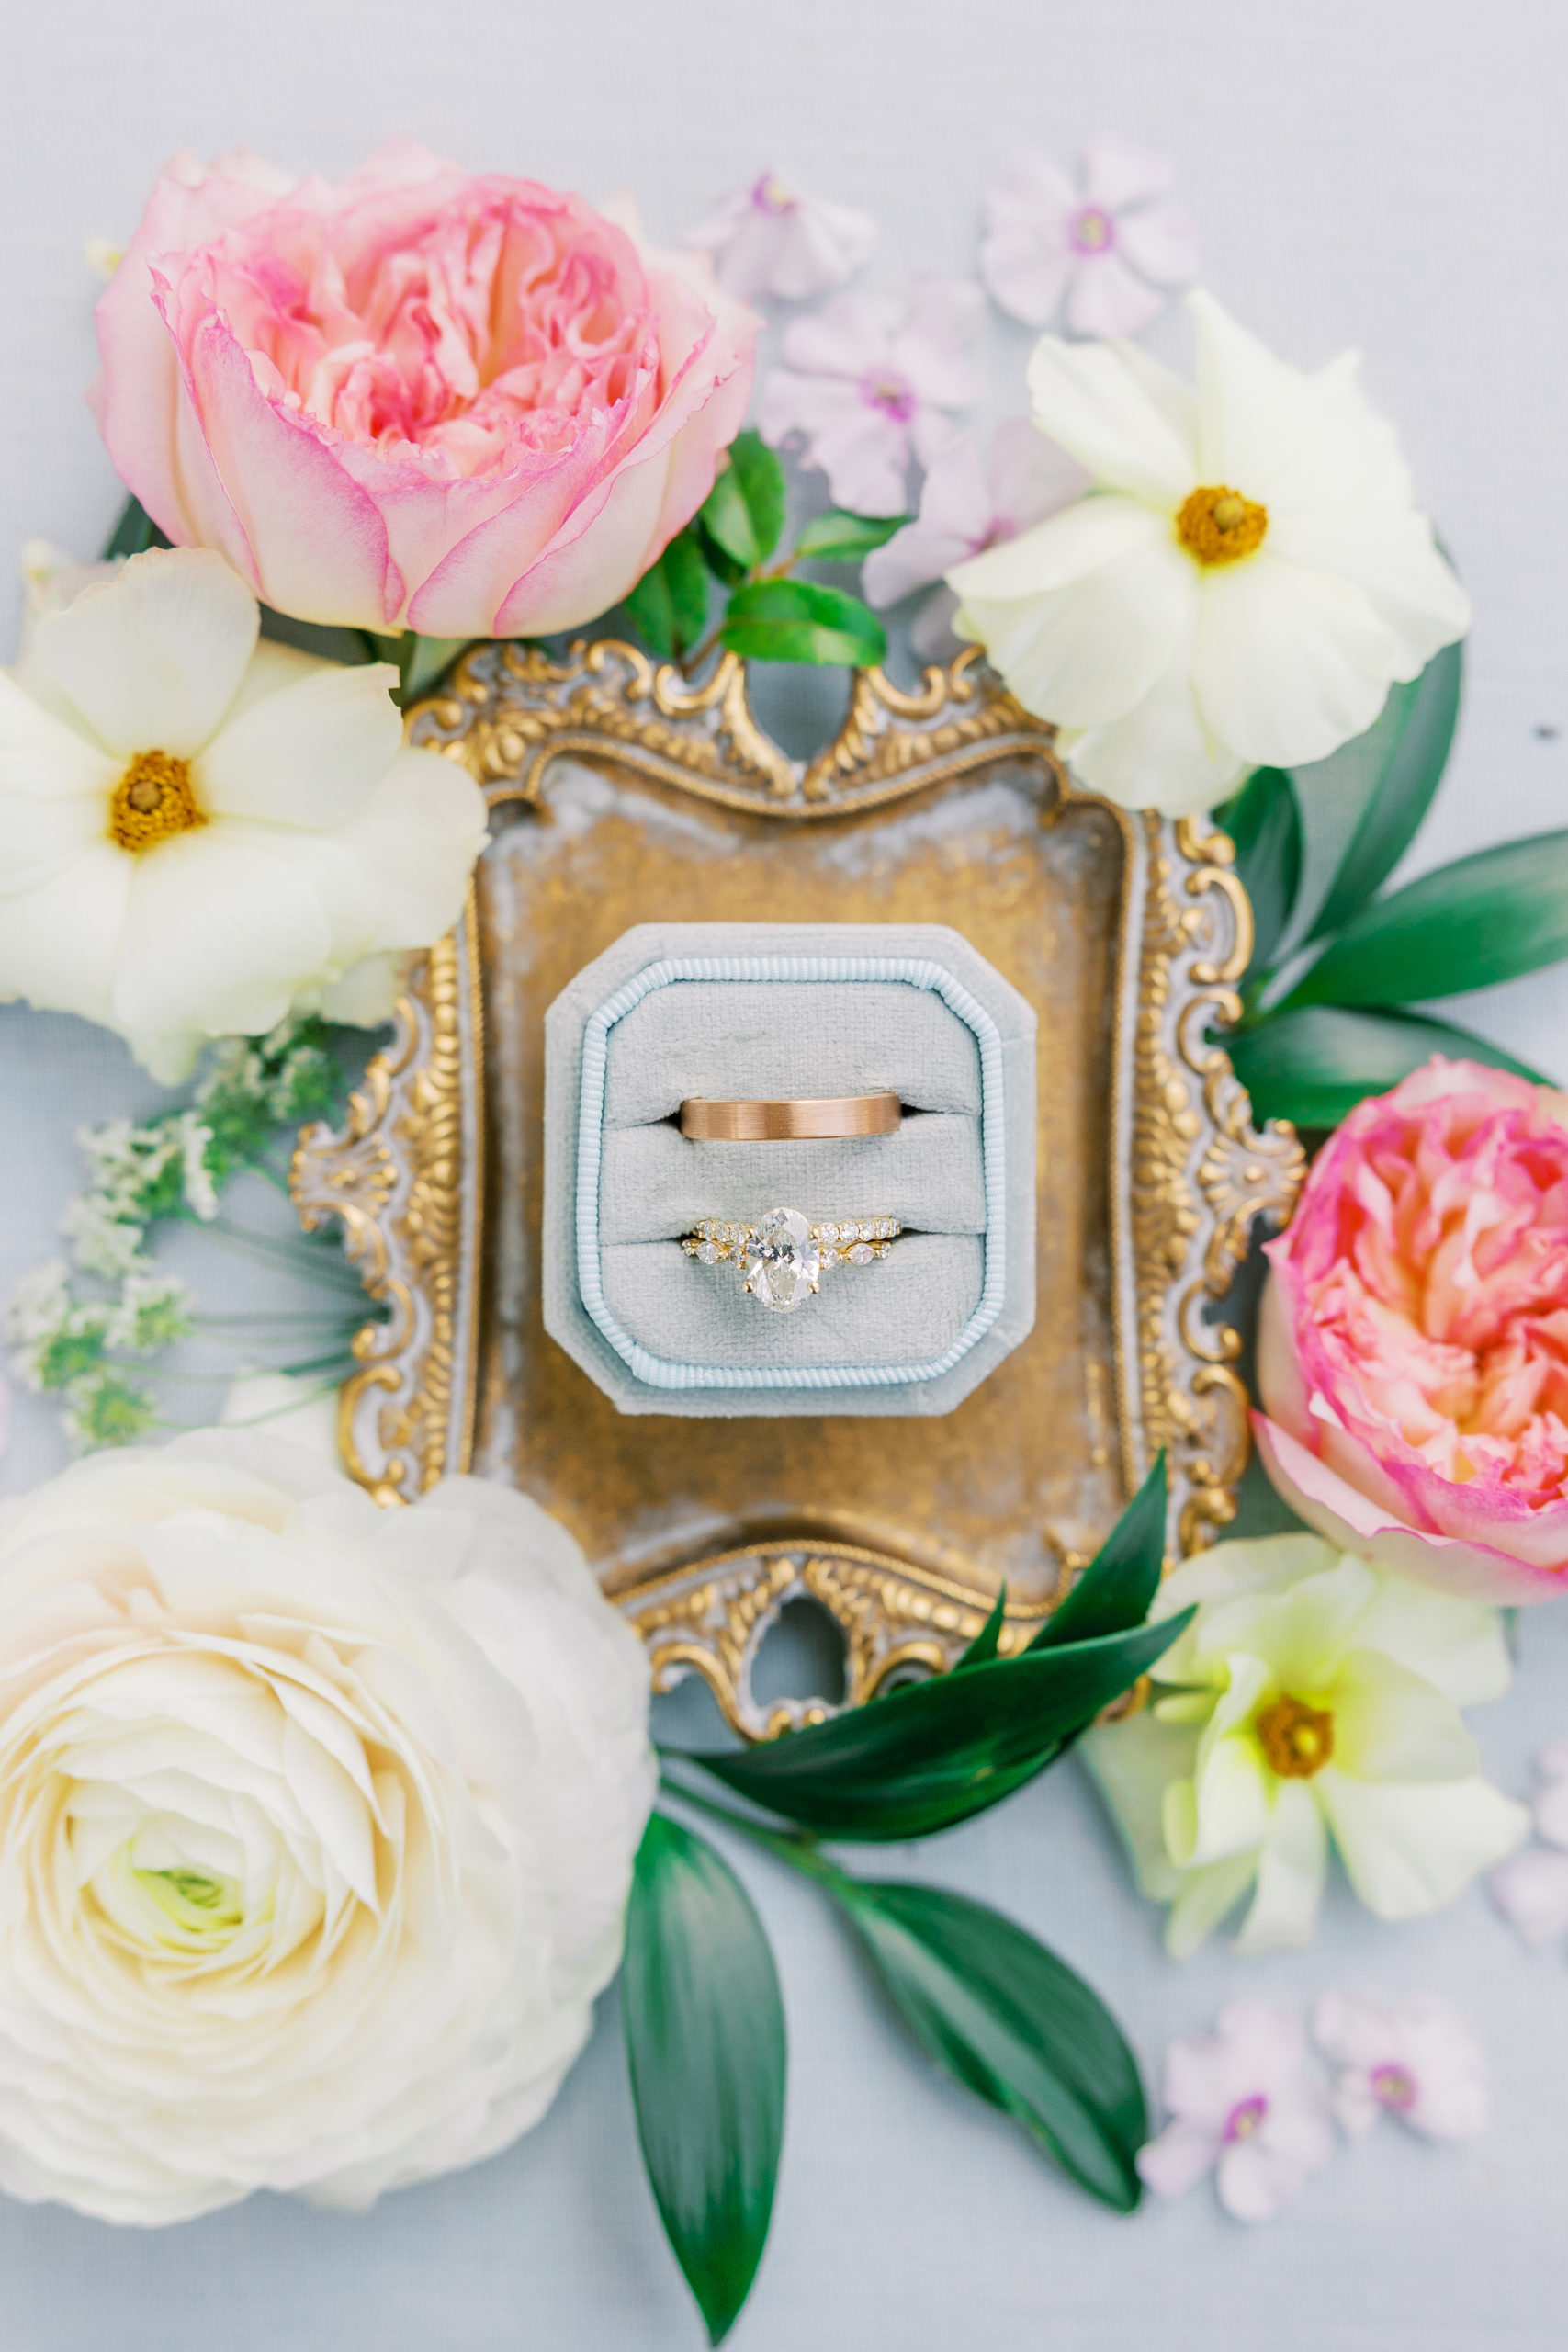 Wedding rings on top of small golden tray with pink and cream flowers